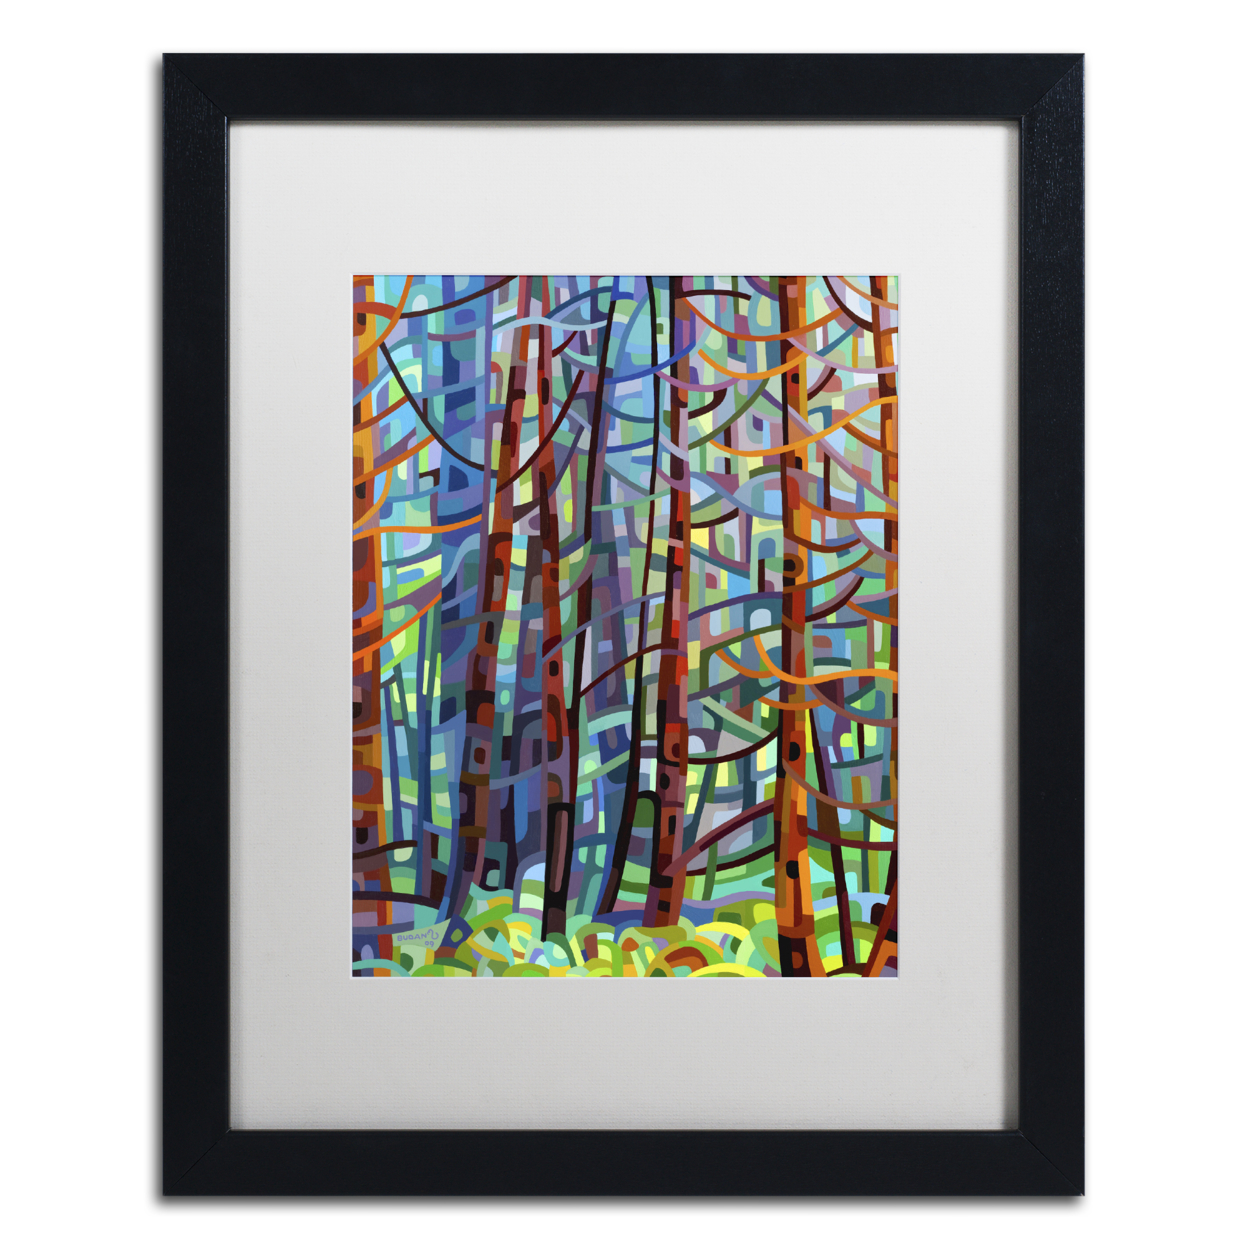 Mandy Budan 'In A Pine Forest' Black Wooden Framed Art 18 X 22 Inches